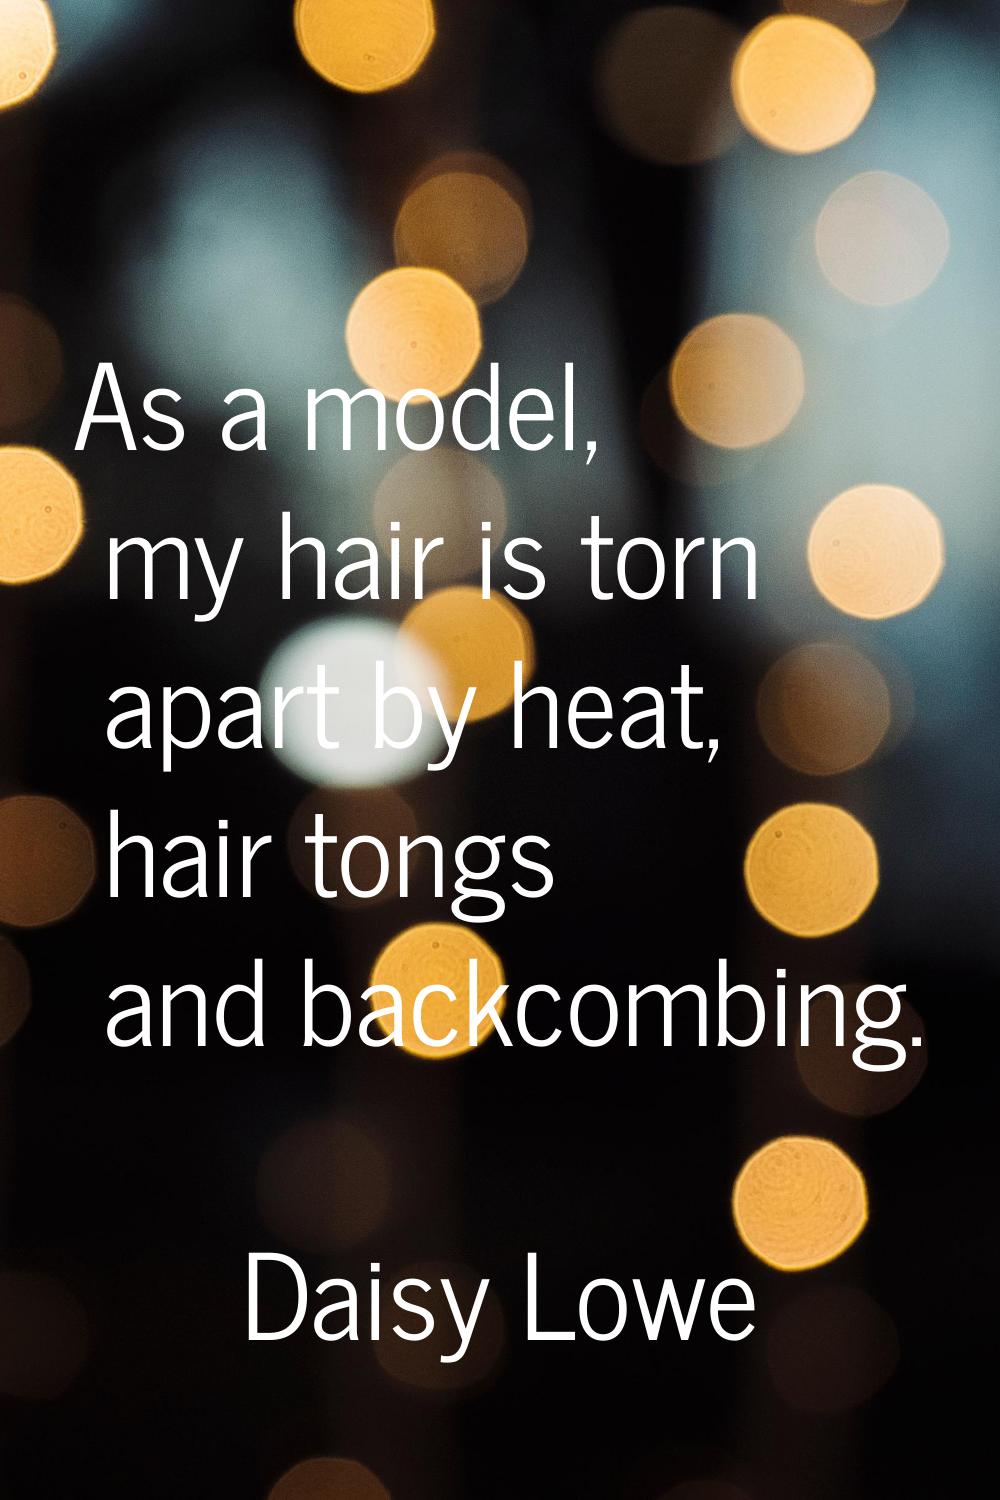 As a model, my hair is torn apart by heat, hair tongs and backcombing.